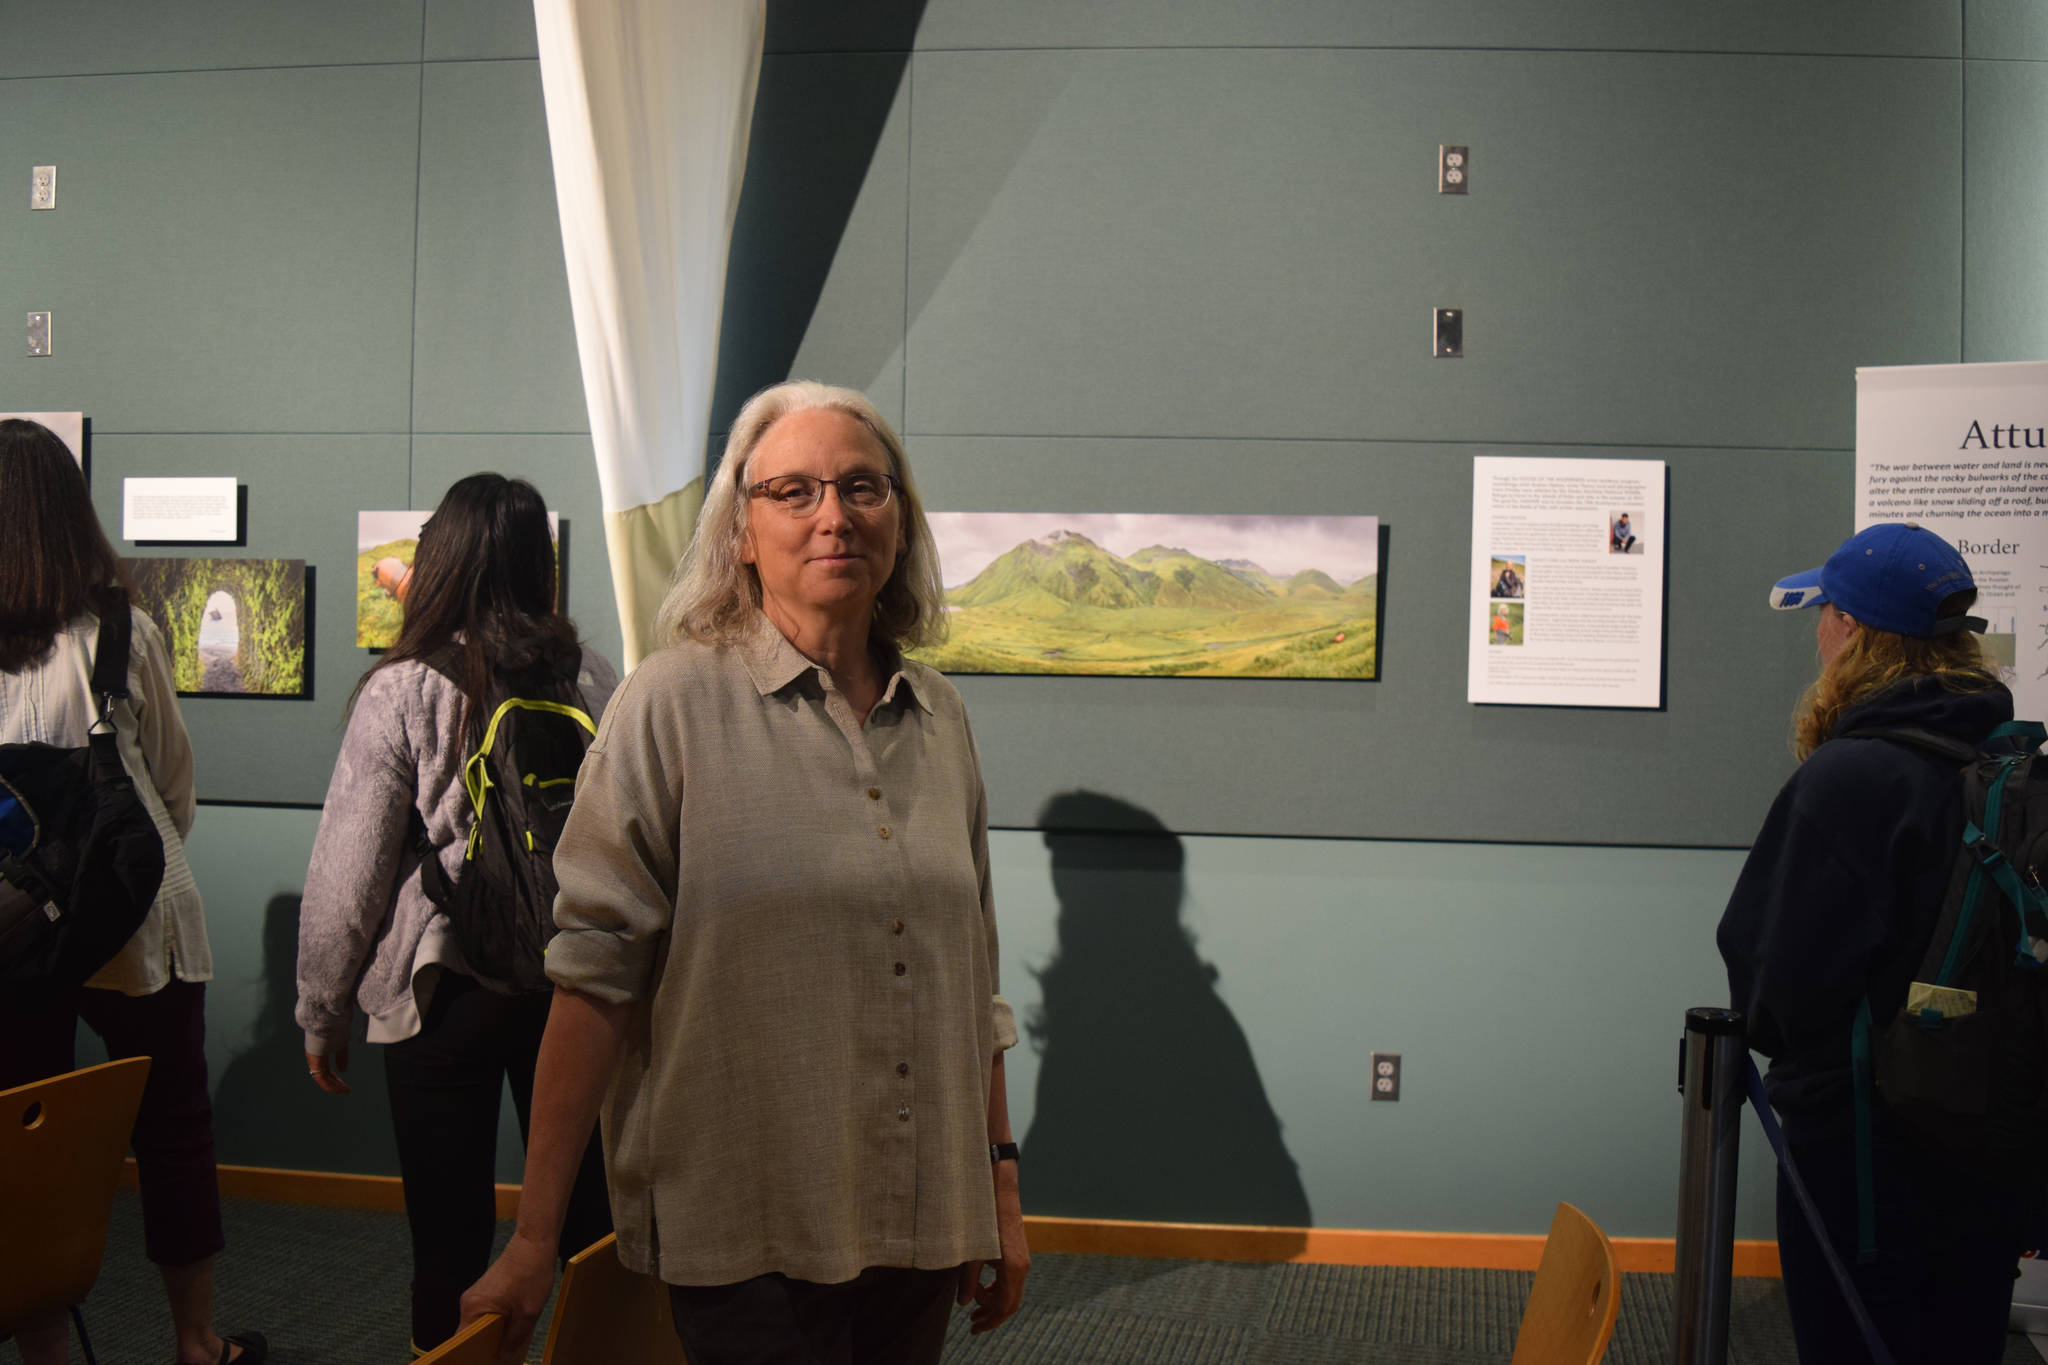 Nancy Lord at the Reflections of Attu art show on Friday, July 6, 2018 at Islands and Oceans Visitor Center in Homer, Alaska. (Photo by Jennifer Tarnacki)